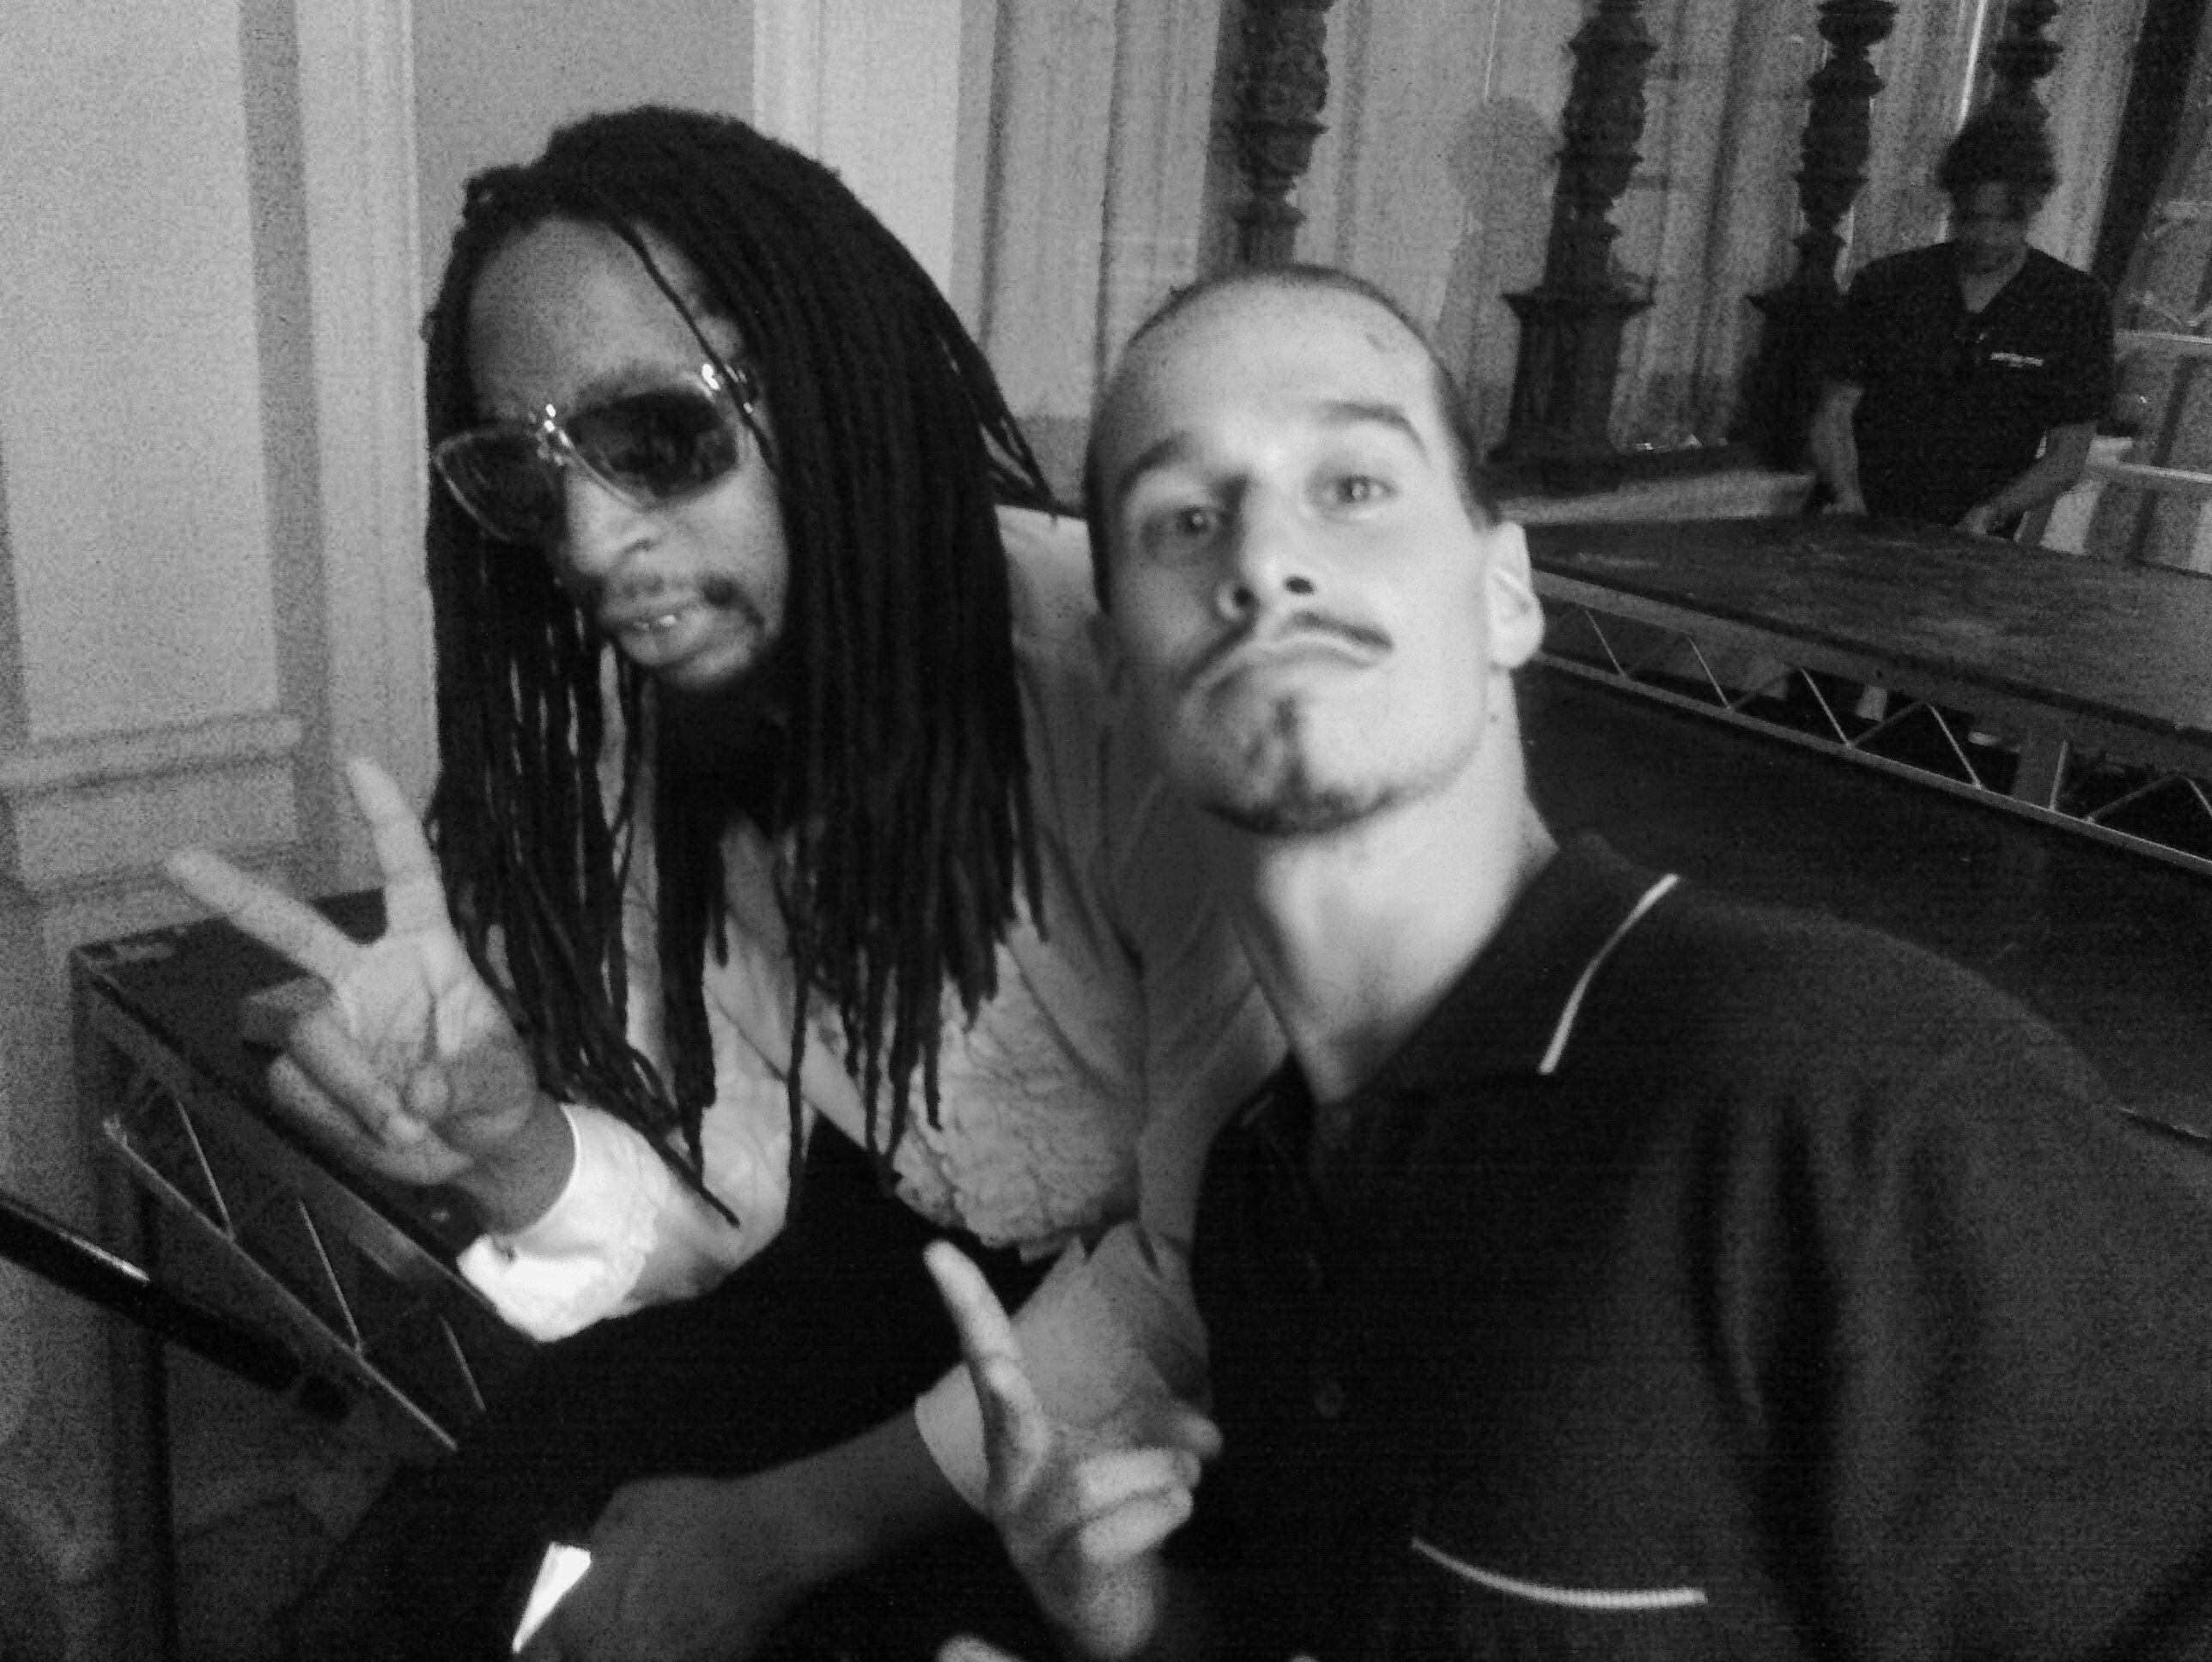 Lil Jon and Sancho Martin - Lead Movement Actor/Contortionist behind the scenes Travis Barker 